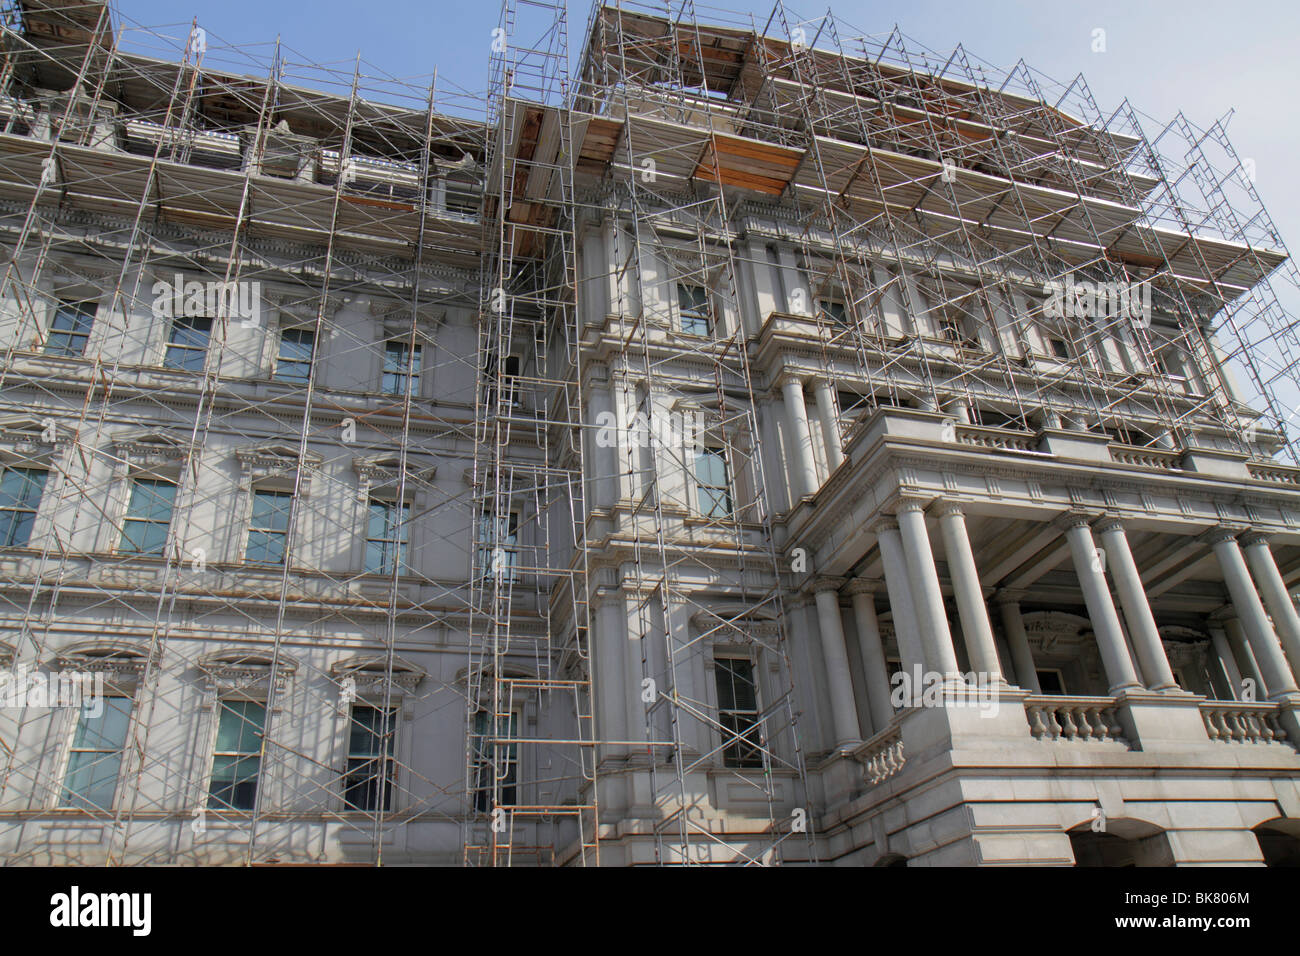 Washington DC,Eisenhower Executive Office building,1871,EEOB,government,renovation,government,historic landmark,French Second Empire style,architect A Stock Photo